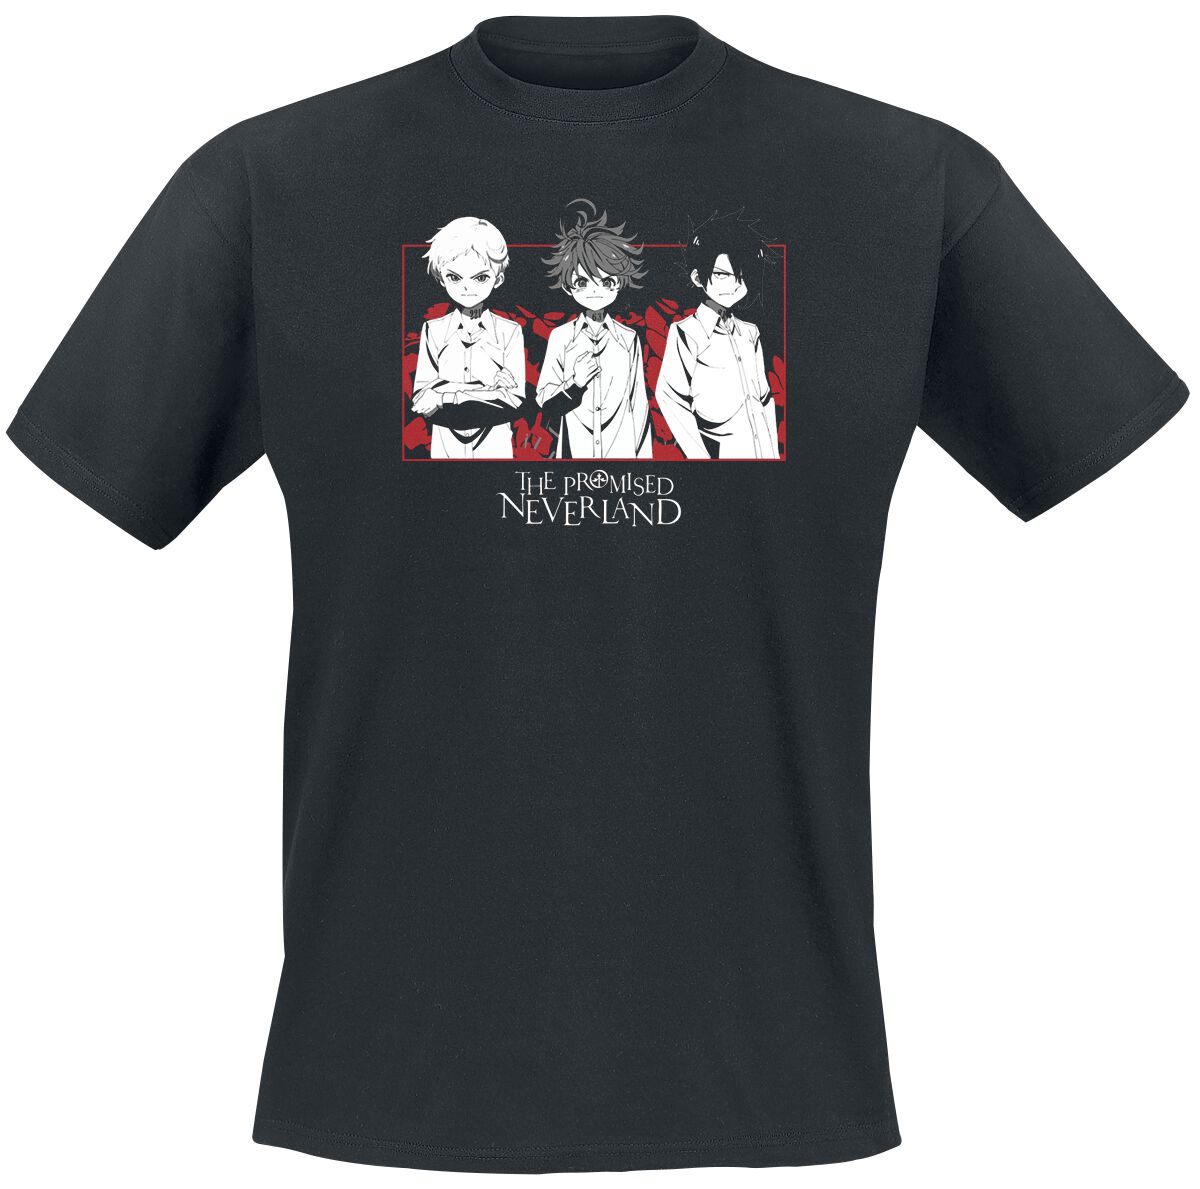 The Promised Neverland Emma, Norman T-Shirt schwarz in S